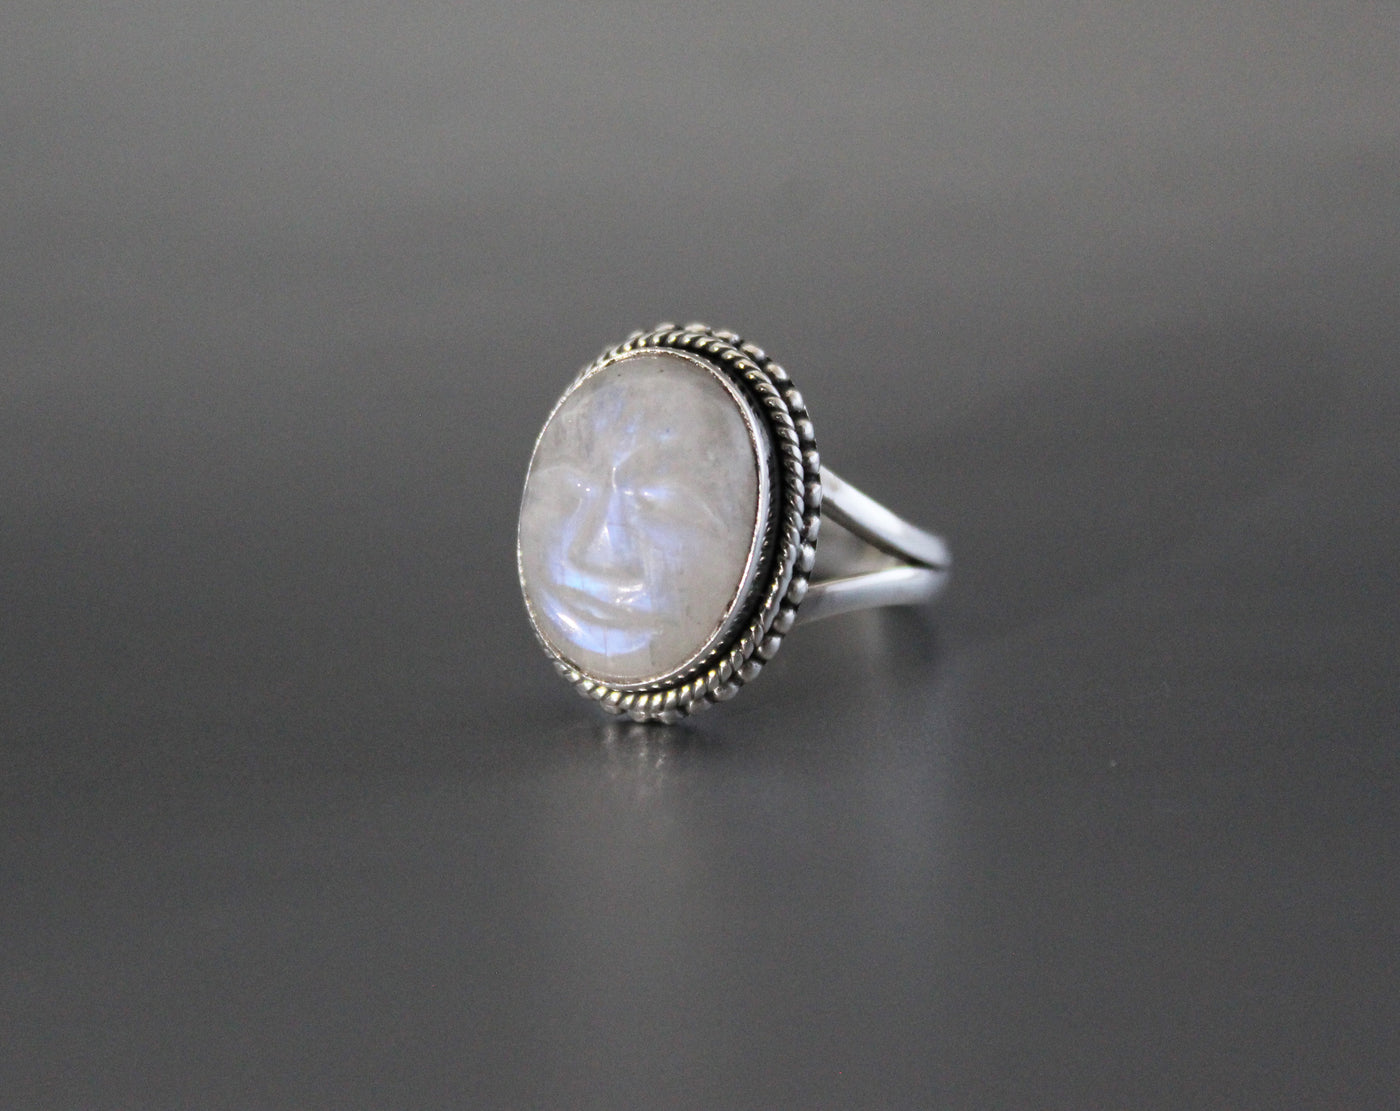 Rainbow moonstone Ring,Blue Flash Ring,Moon Face Ring,Crescent Moon Ring,Sterling Silver Ring for Women,Celestial Jewelry,Moon Ring,Boho